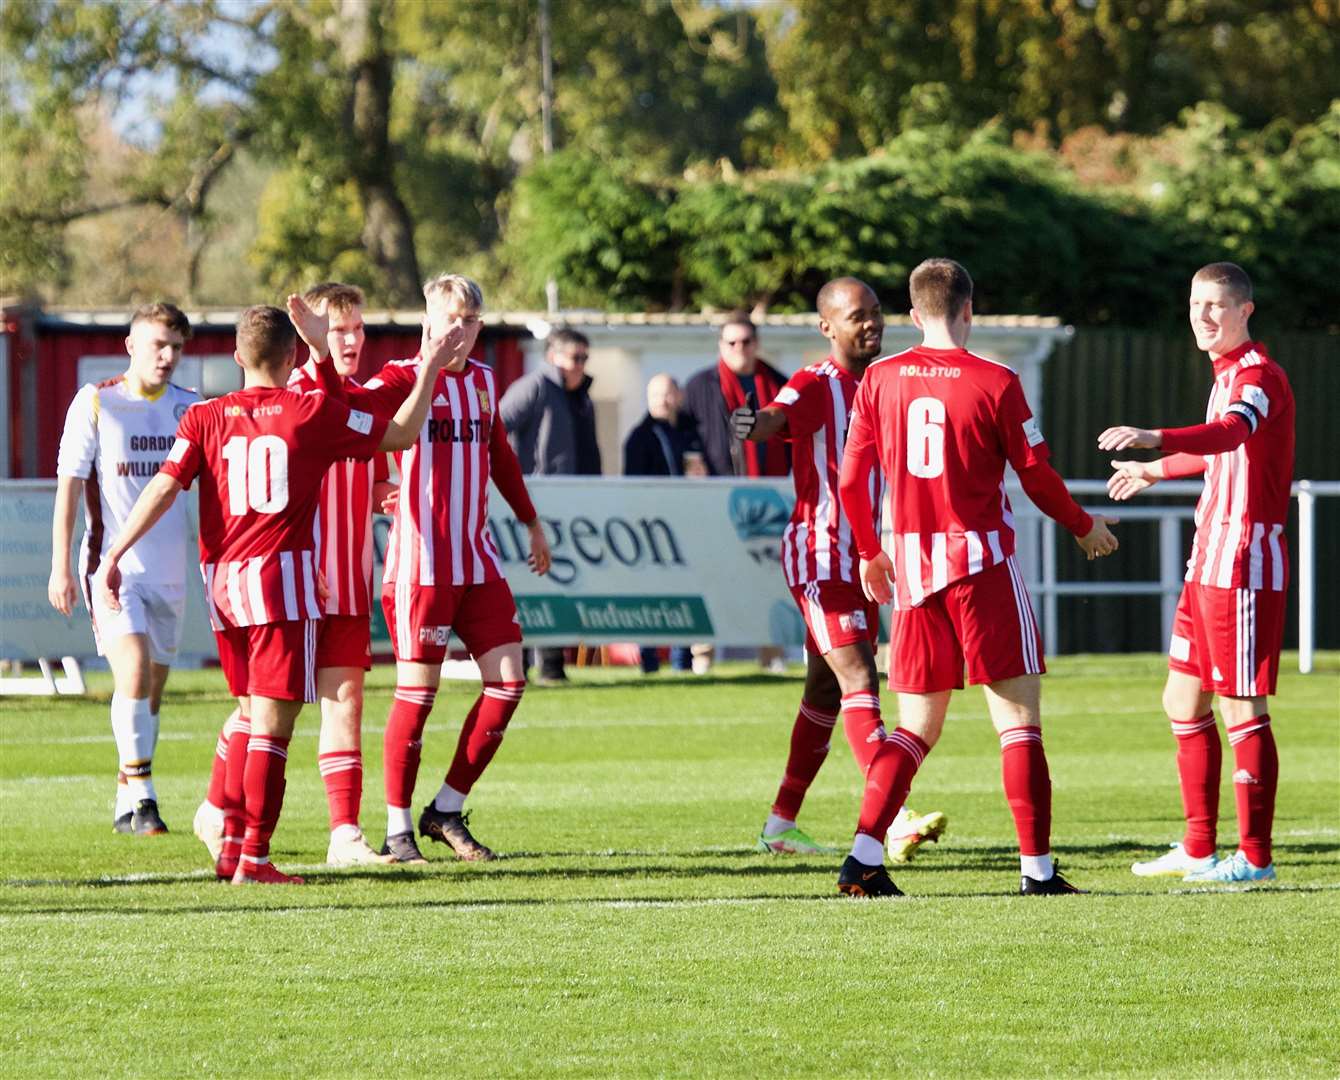 Formartine vs Forres. Picture: Phil Harman